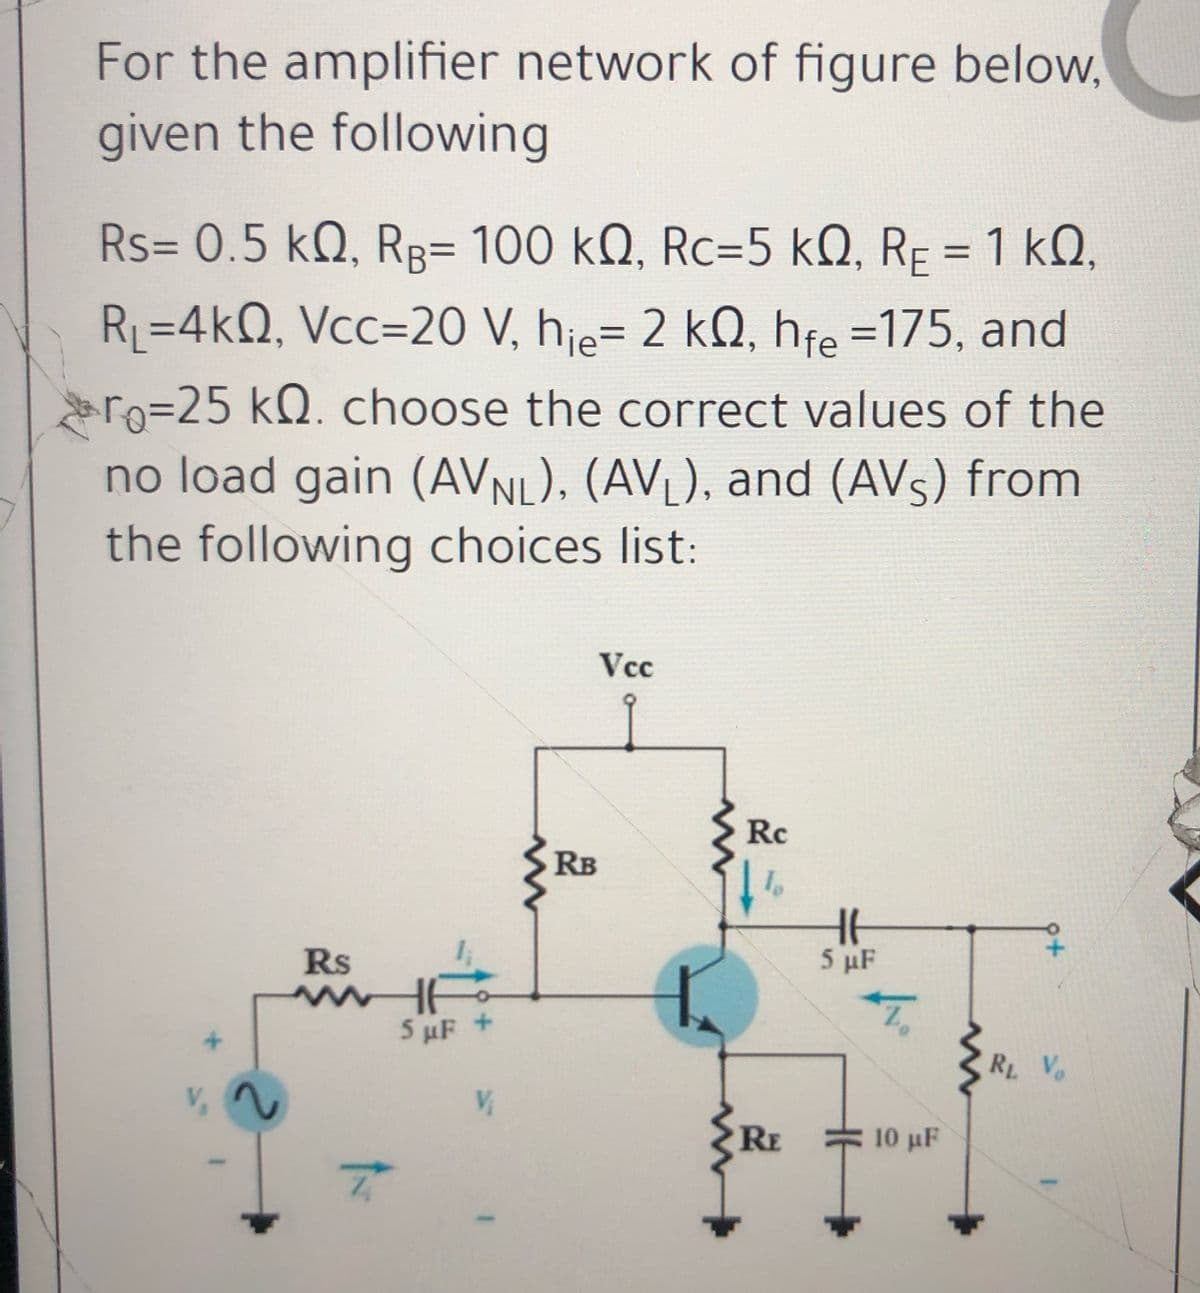 For the amplifier network of figure below,
given the following
Rs= 0.5 kQ, RR= 100 kQ, Rc=5 kQ, RF = 1 kQ,
R=4kQ, Vcc=20 V, hie= 2 kQ, hfe =175, and
ro=25 kQ. choose the correct values of the
no load gain (AVNL), (AV), and (AVS) from
the following choices list:
Vcc
Rc
RB
Rs
5 μF
5 µF +
R Vo
RE
10 μΕ.
